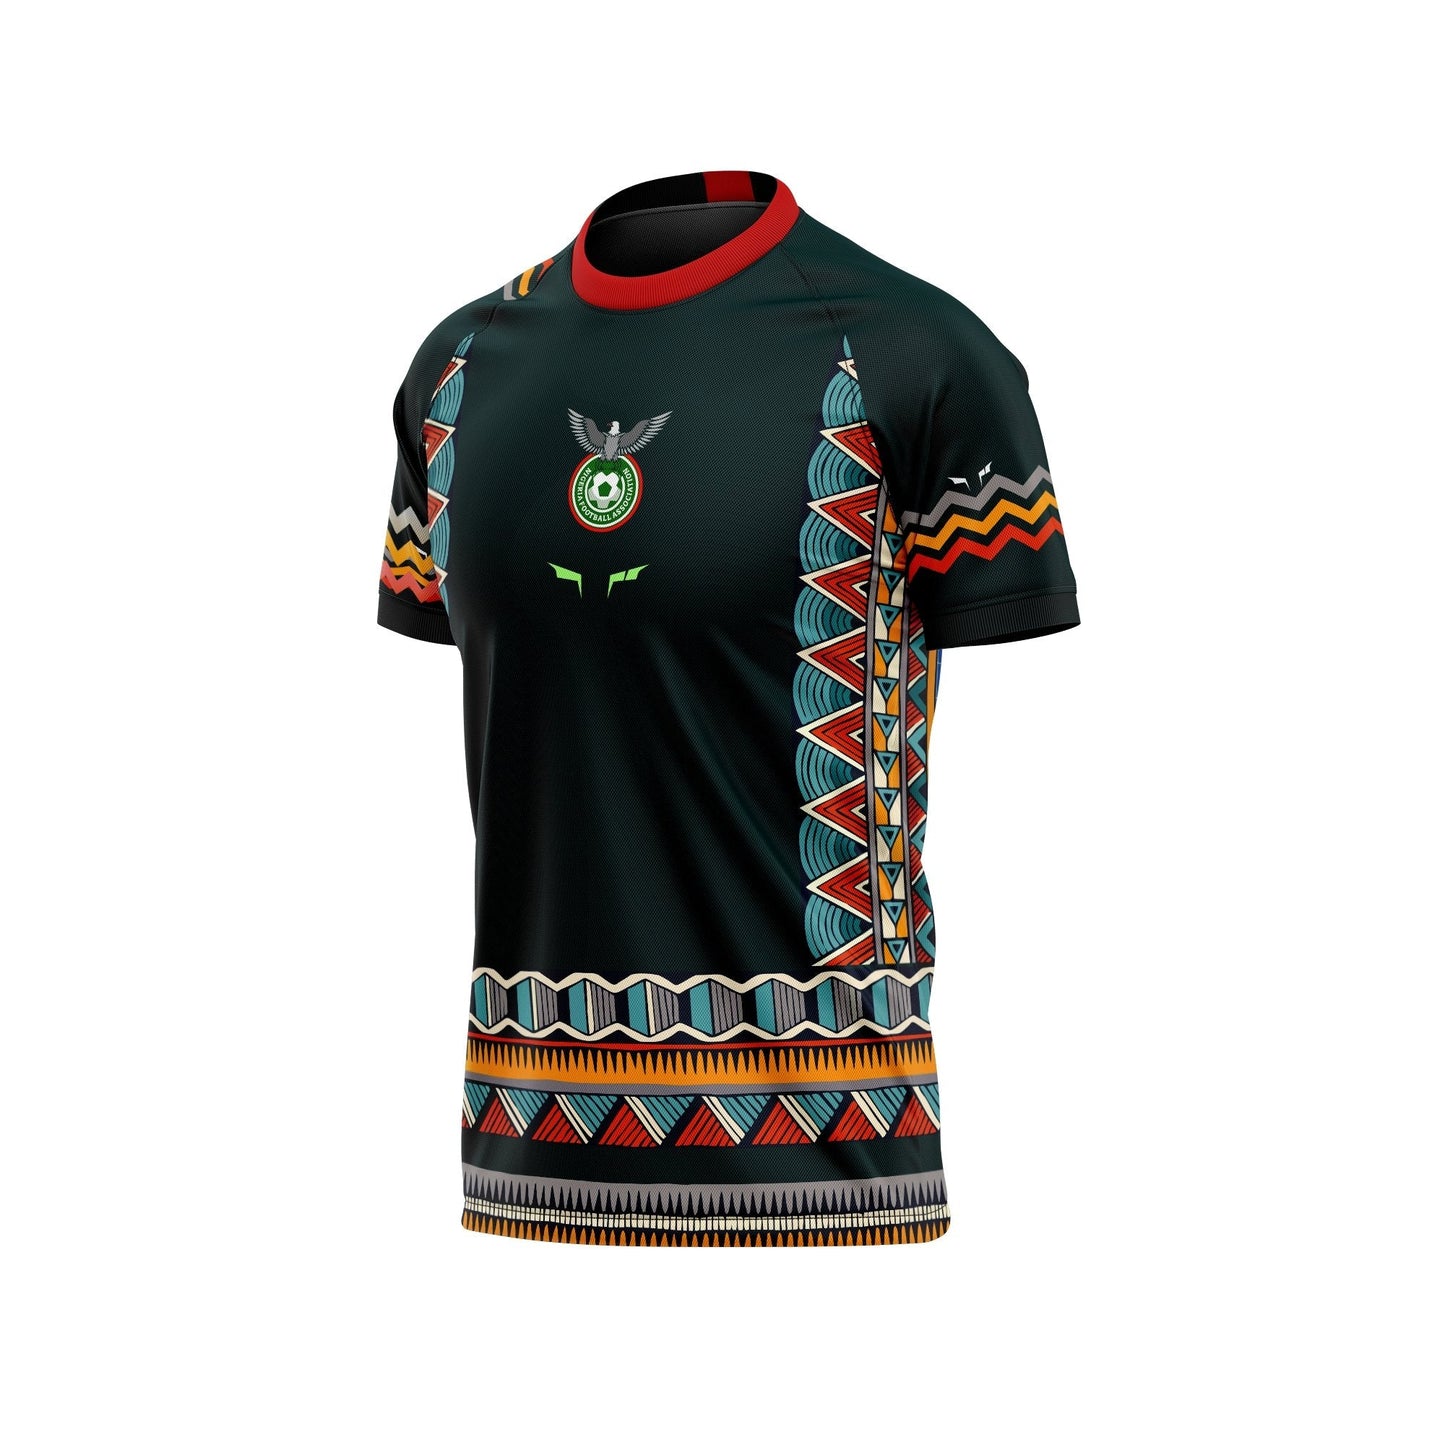 thelegalgang,Indian Ultras Nigeria Concept Football Jersey,JERSEY.